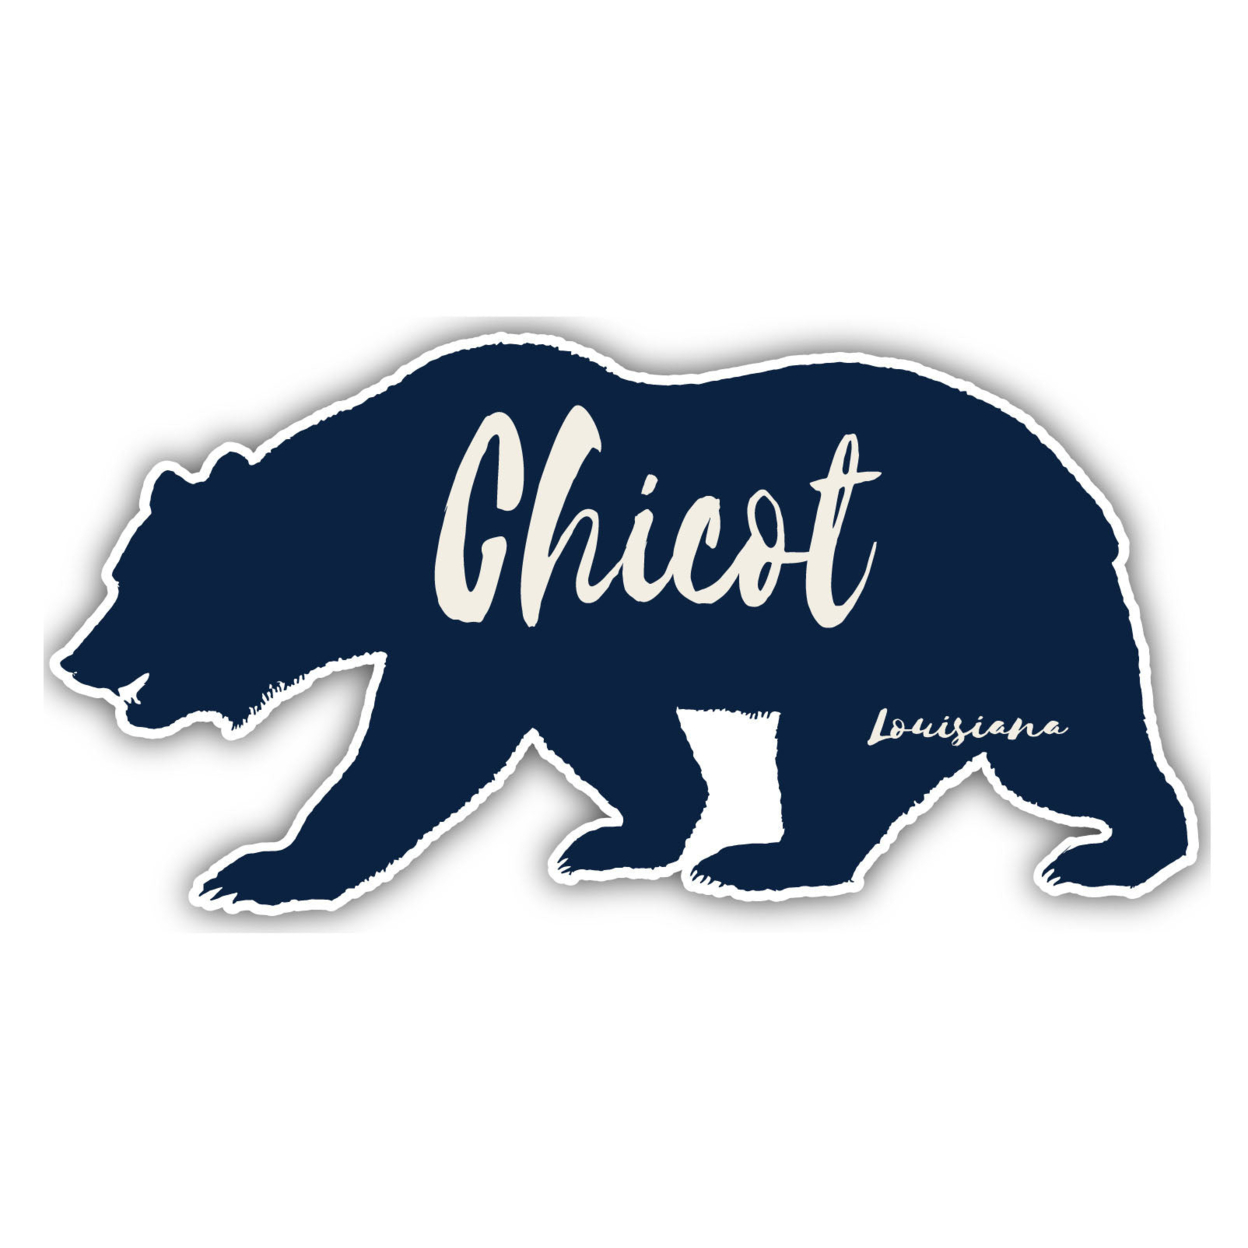 Chicot Louisiana Souvenir Decorative Stickers (Choose Theme And Size) - 4-Pack, 4-Inch, Bear